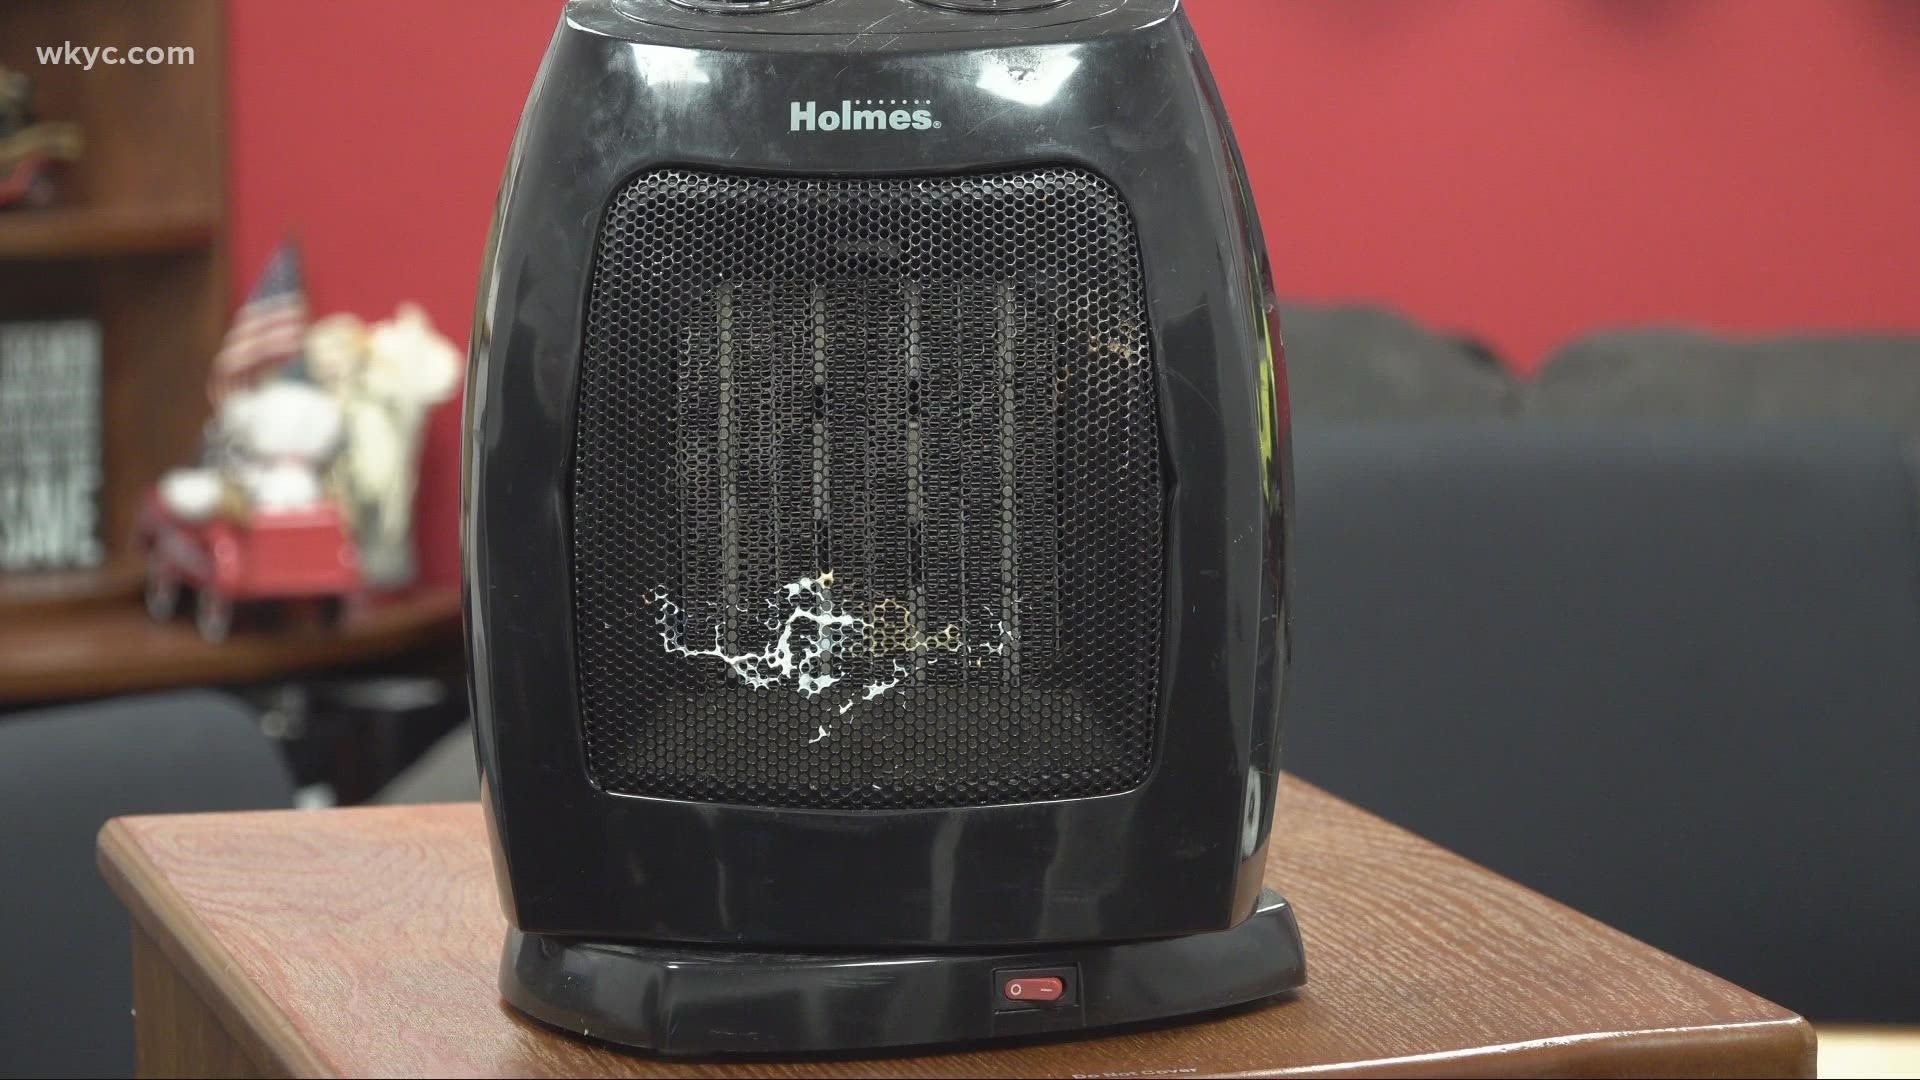 Space heaters, overloaded outlets, and other issues can cause house fires, many of them deadly. Emma Henderson reports.